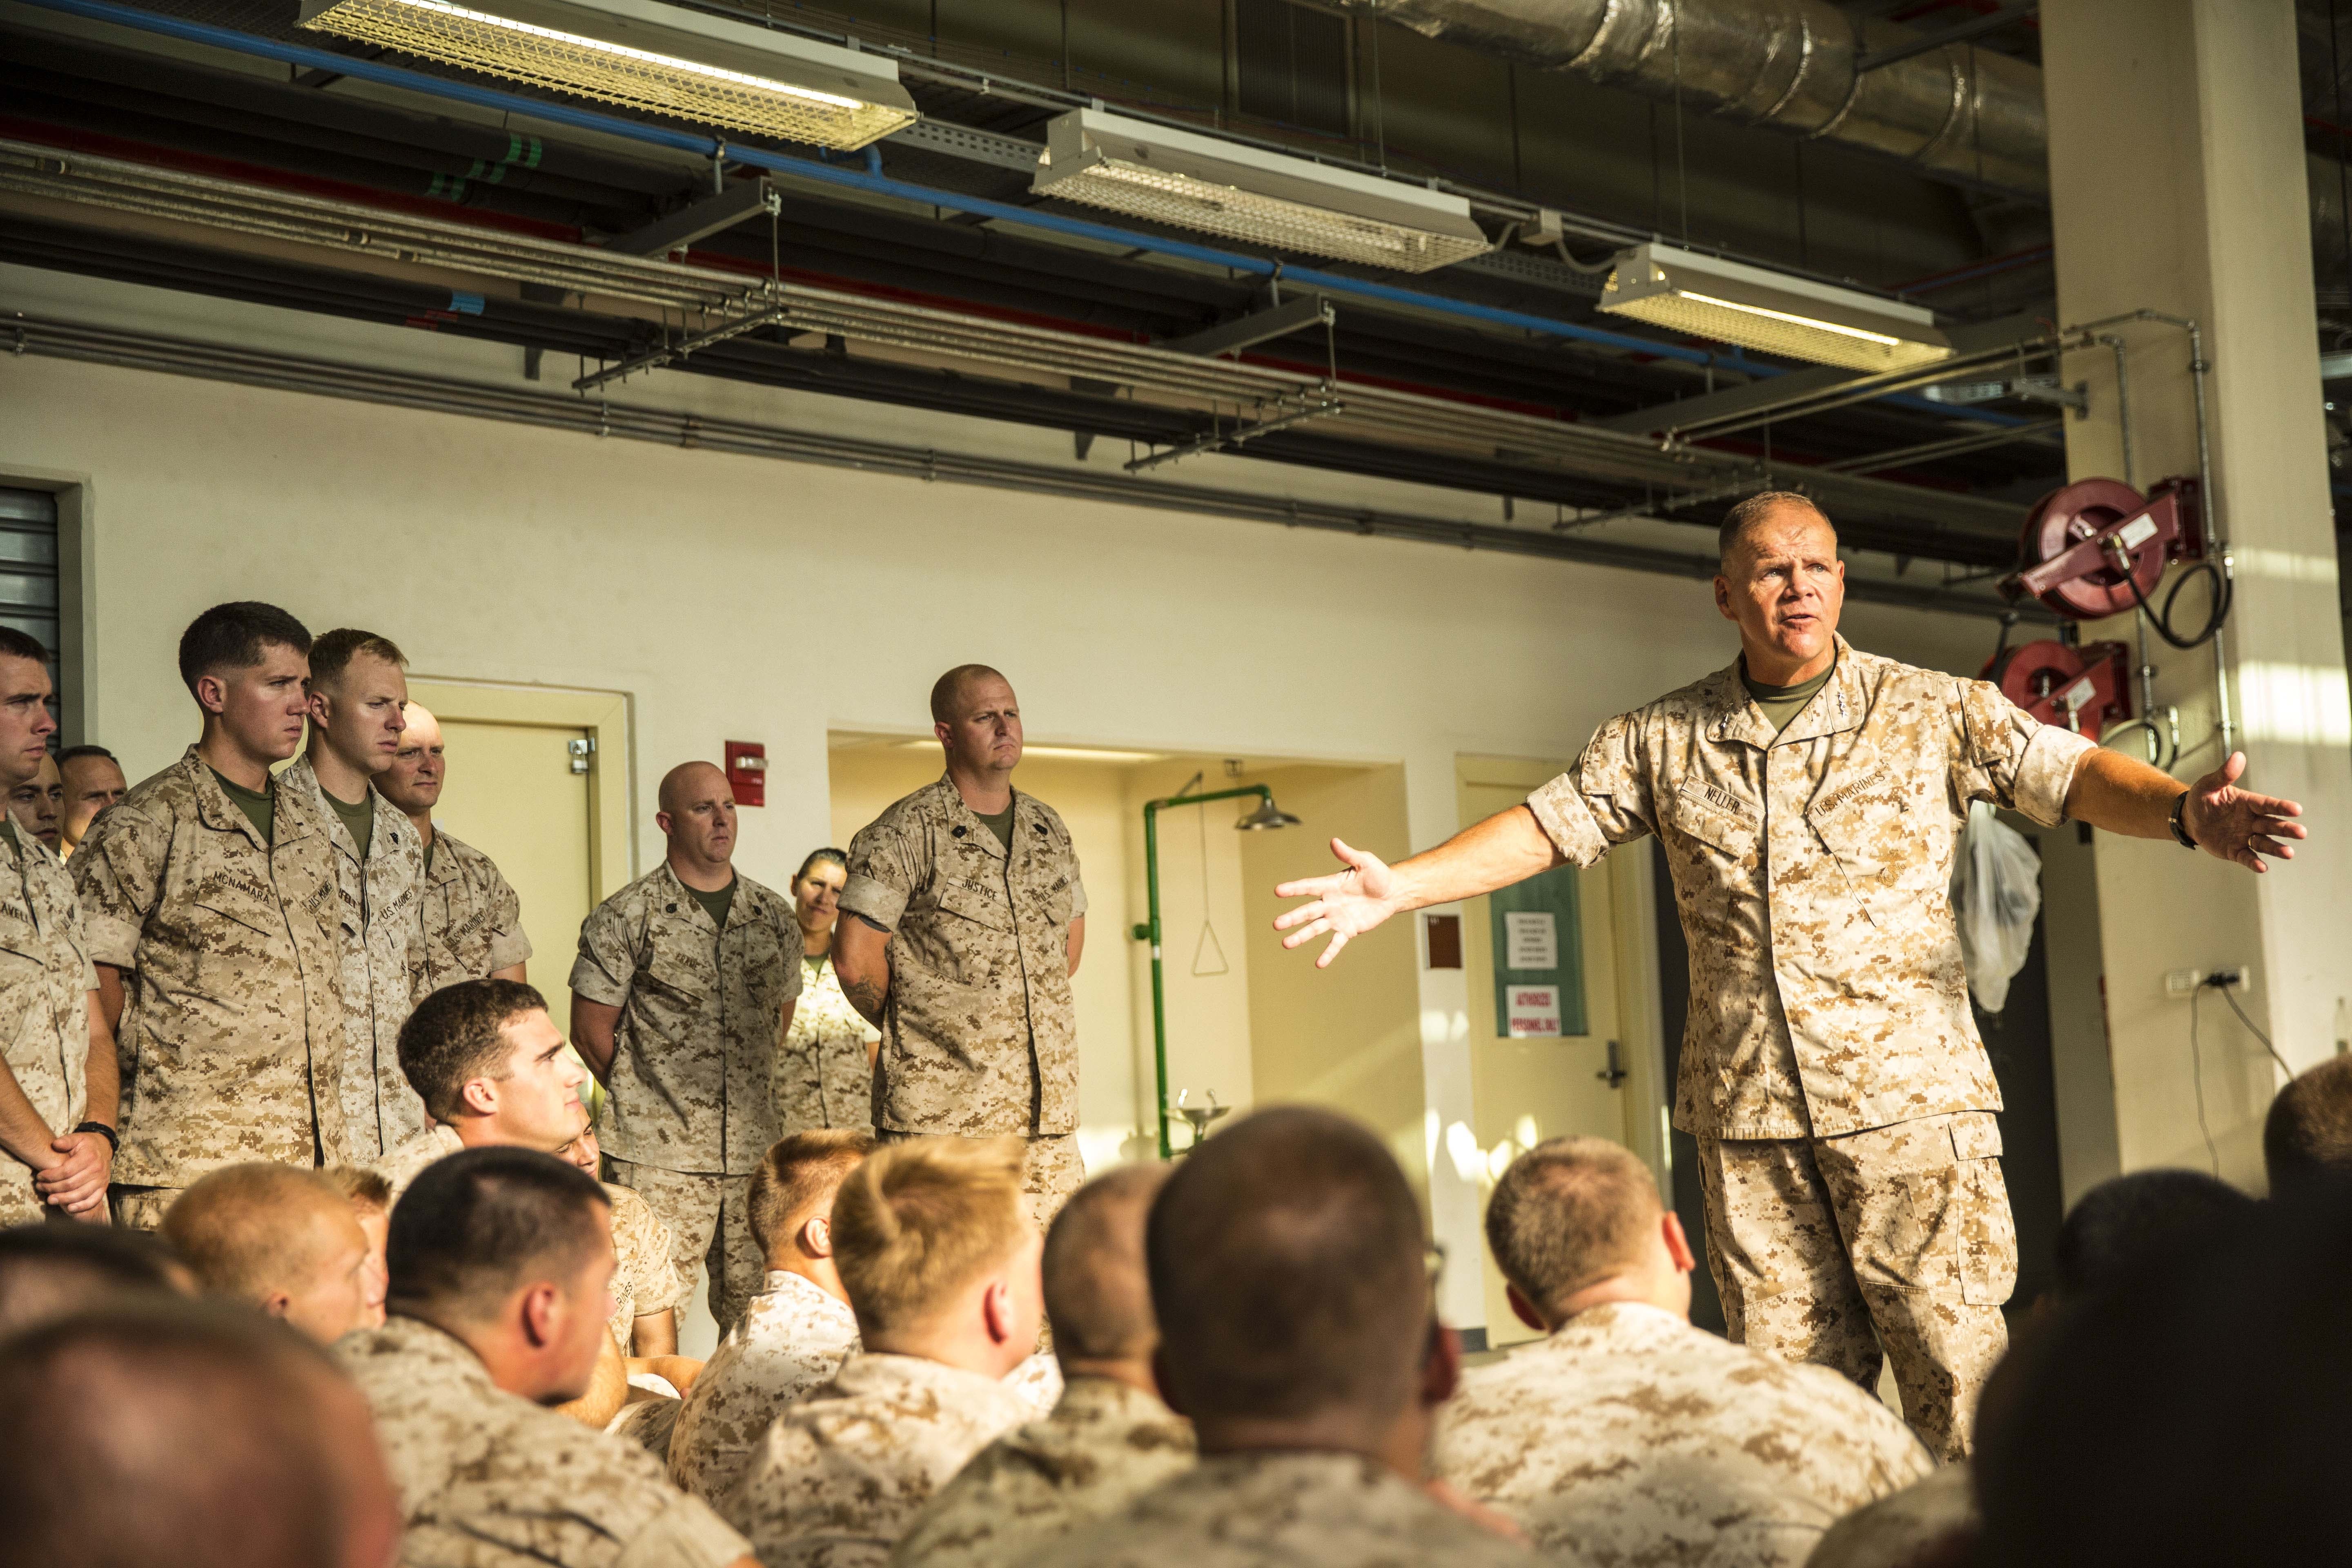 Lt. Gen. Robert Neller, Commander, U.S. Marine Corps Forces, Europe, visited Naval Air Station Sigonella to meet service members with the second iteration of SP-MAGTF Africa 14, Aug. 9, 2014. US Marine Corps photo.